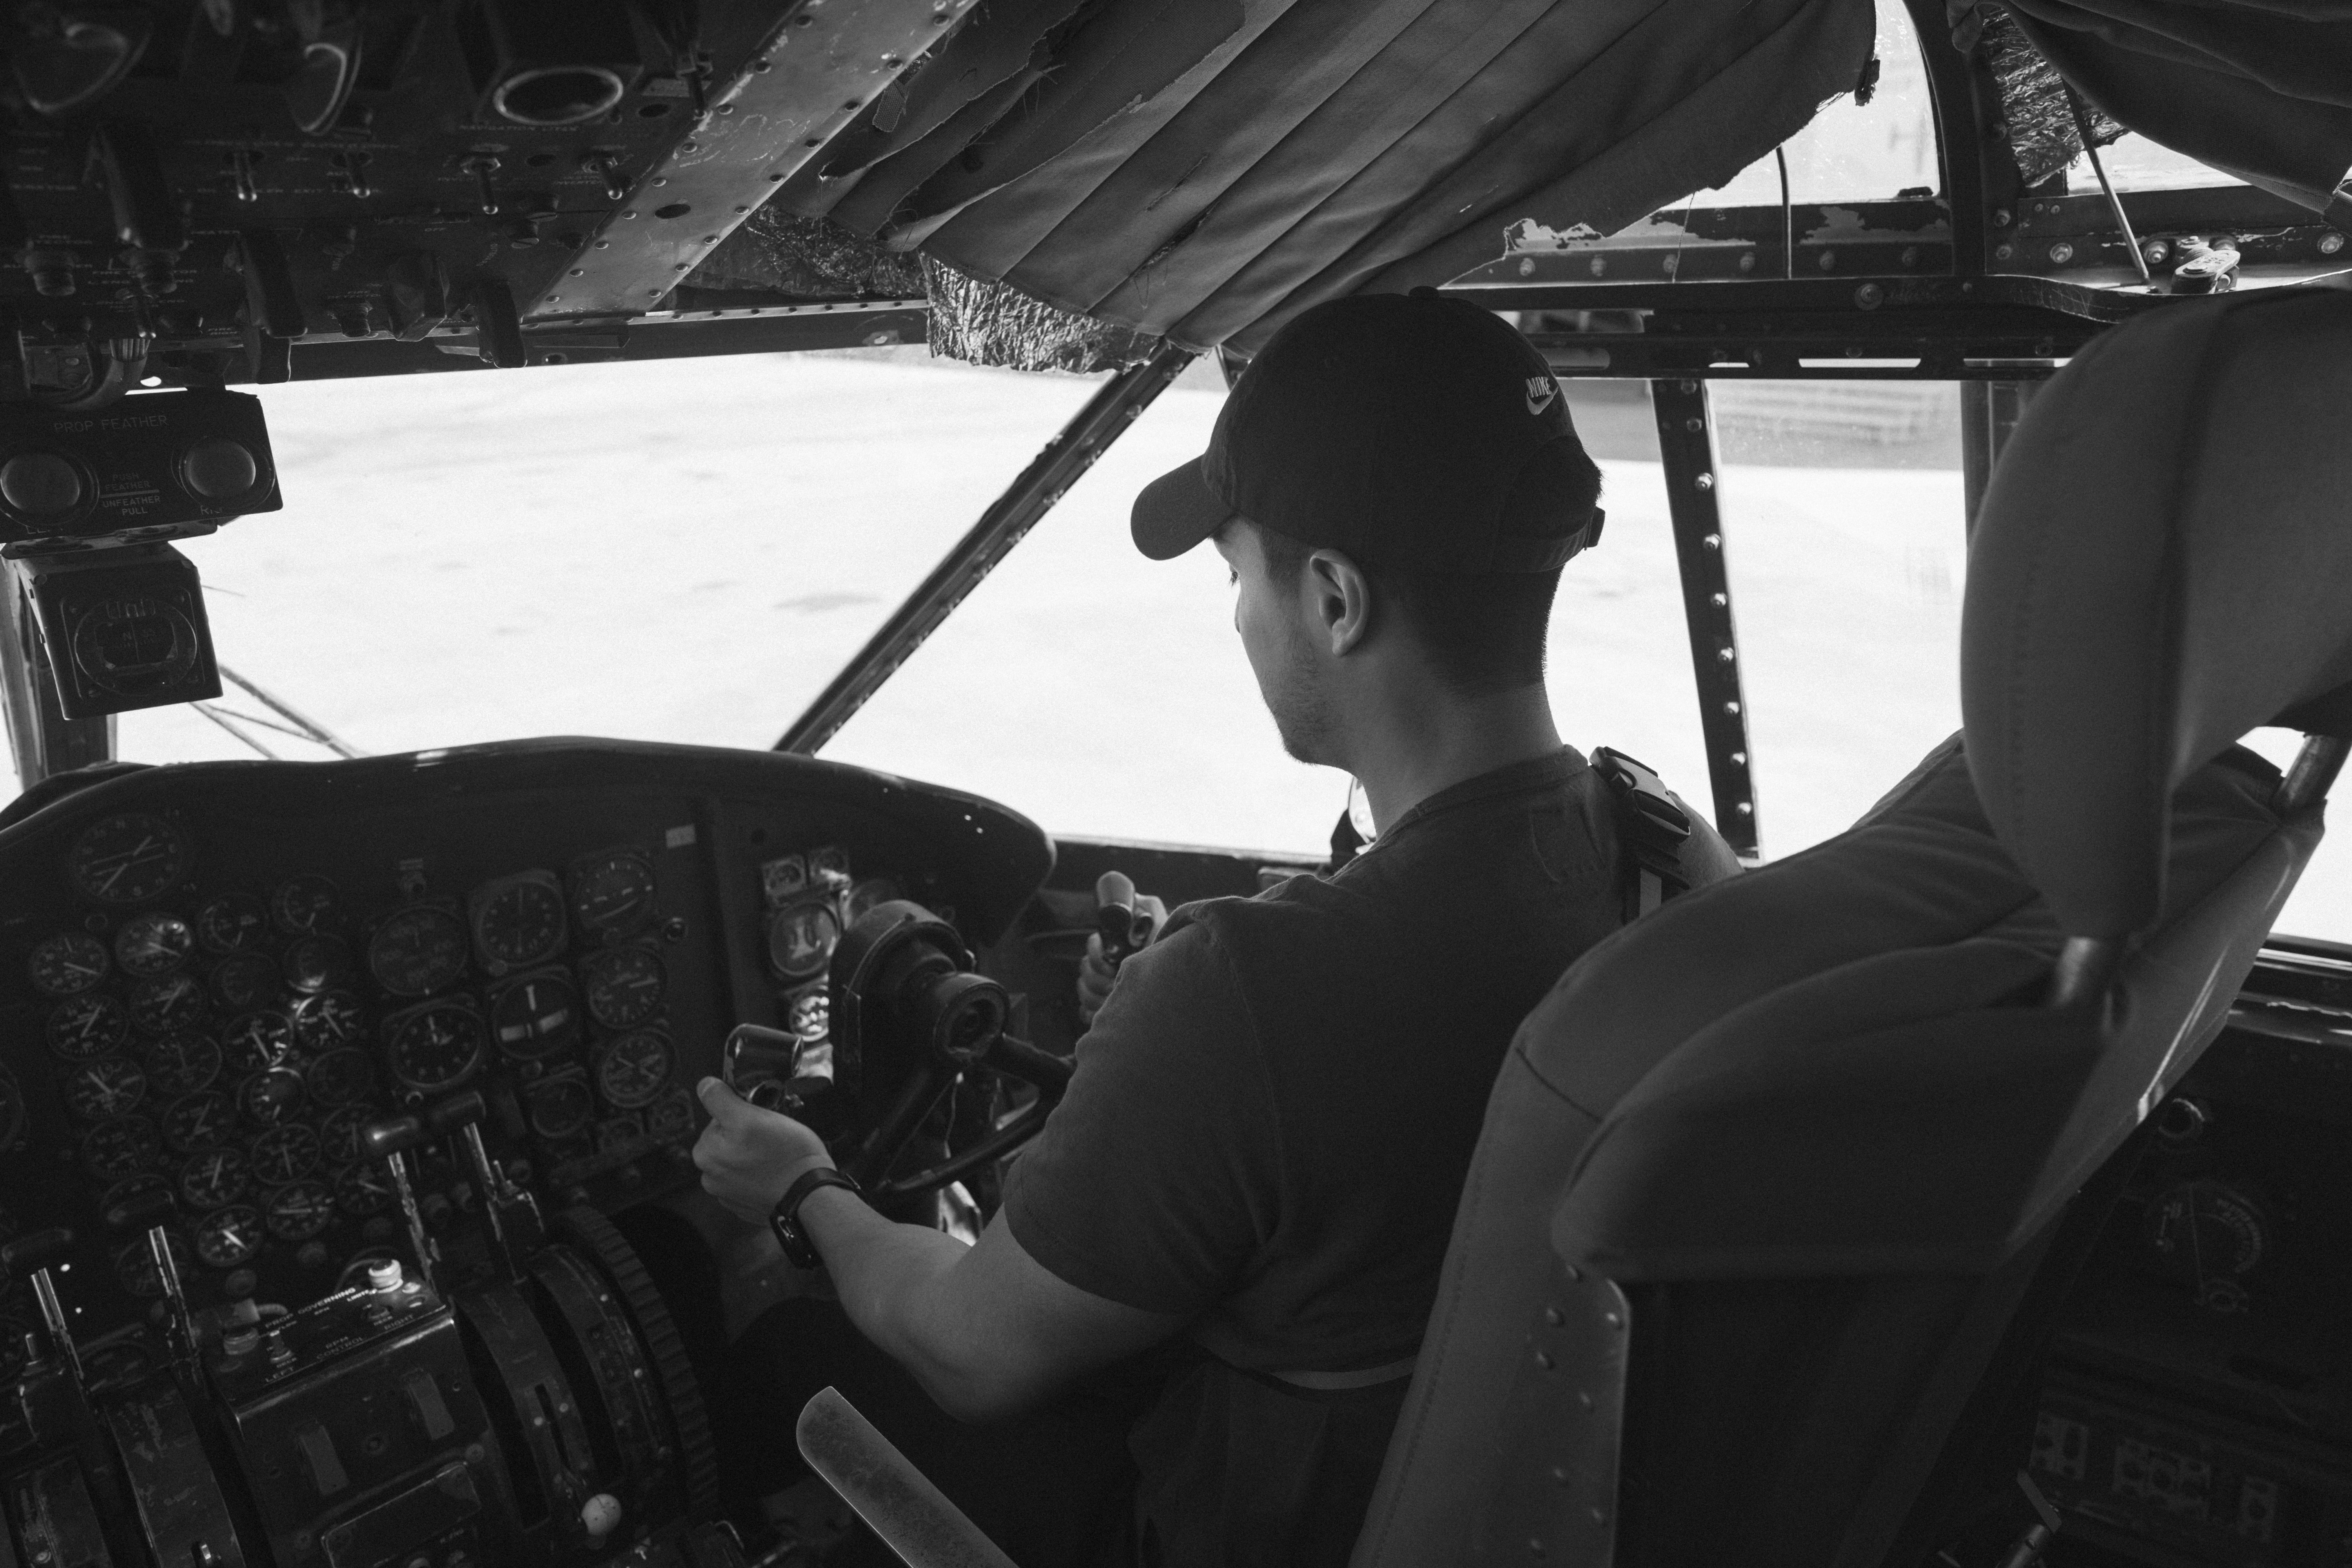 Canva - Grayscale Photo of Man Flying A Plane